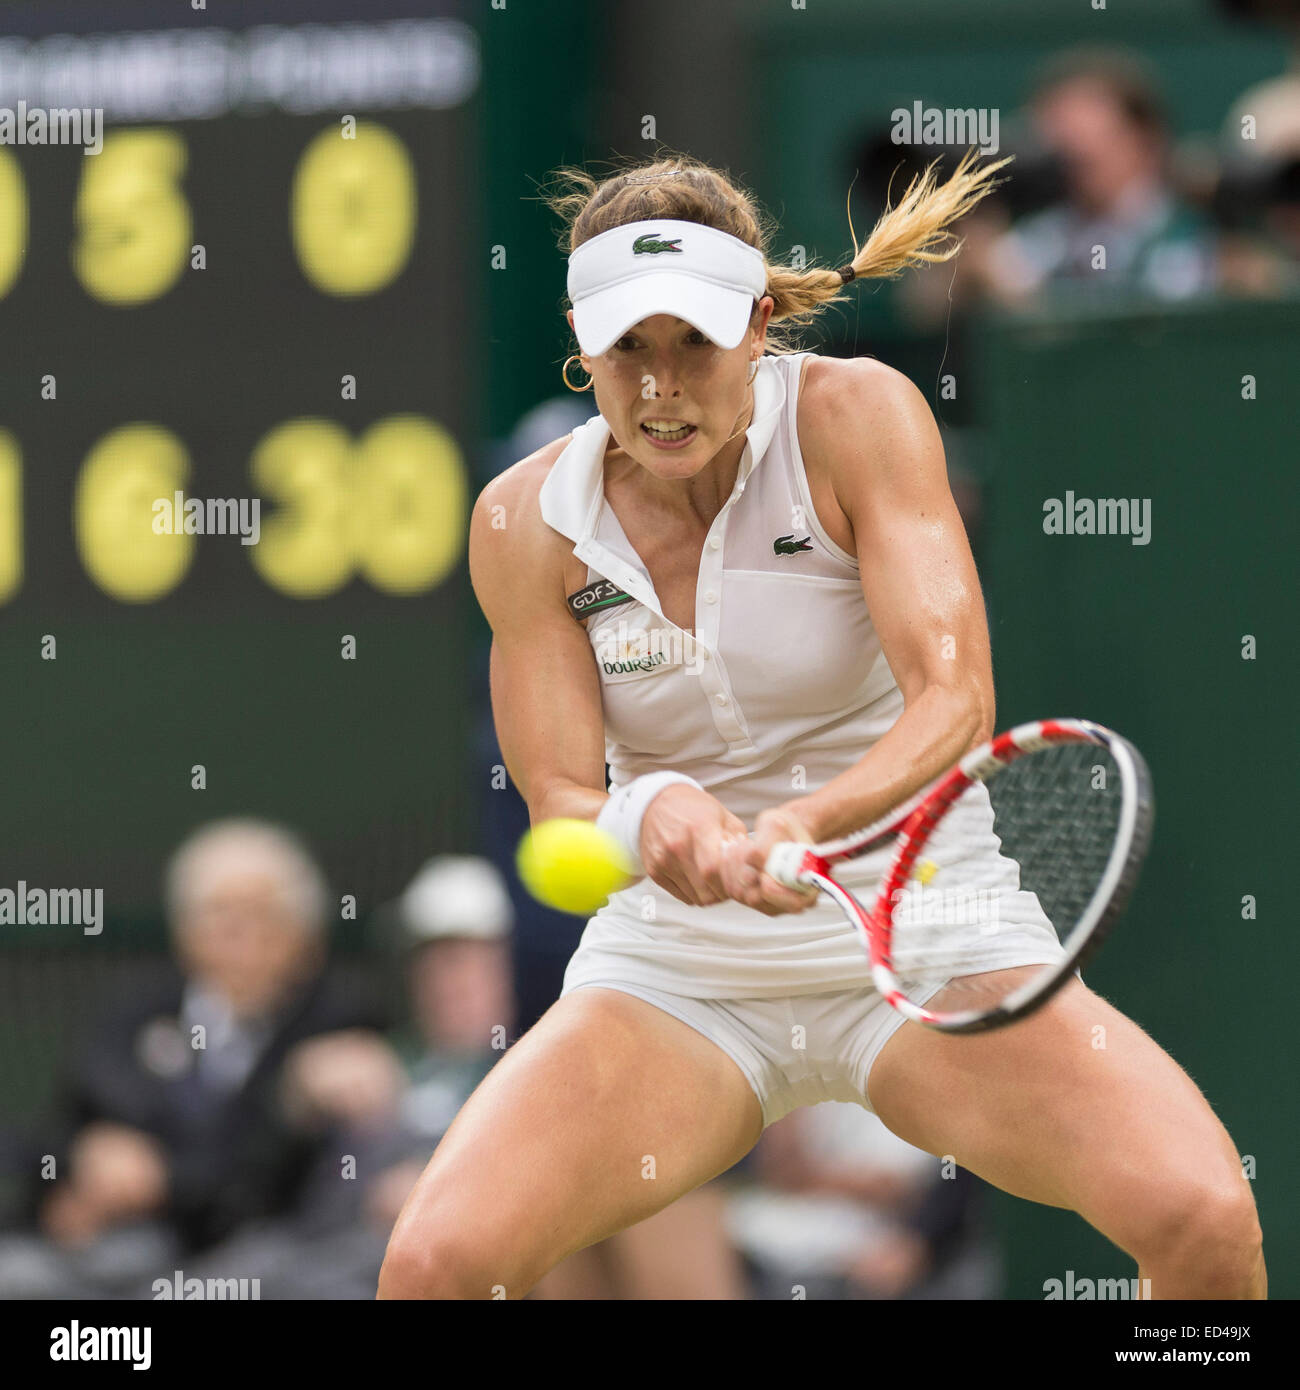 30.06.2014. The Wimbledon Tennis Championships 2014 held at The All England  Lawn Tennis and Croquet Club, London, England, UK. Alize Cornet (FRA) [25]  (collared top, Lacoste/alligator and Boursin branded) v Eugenie Bouchard (